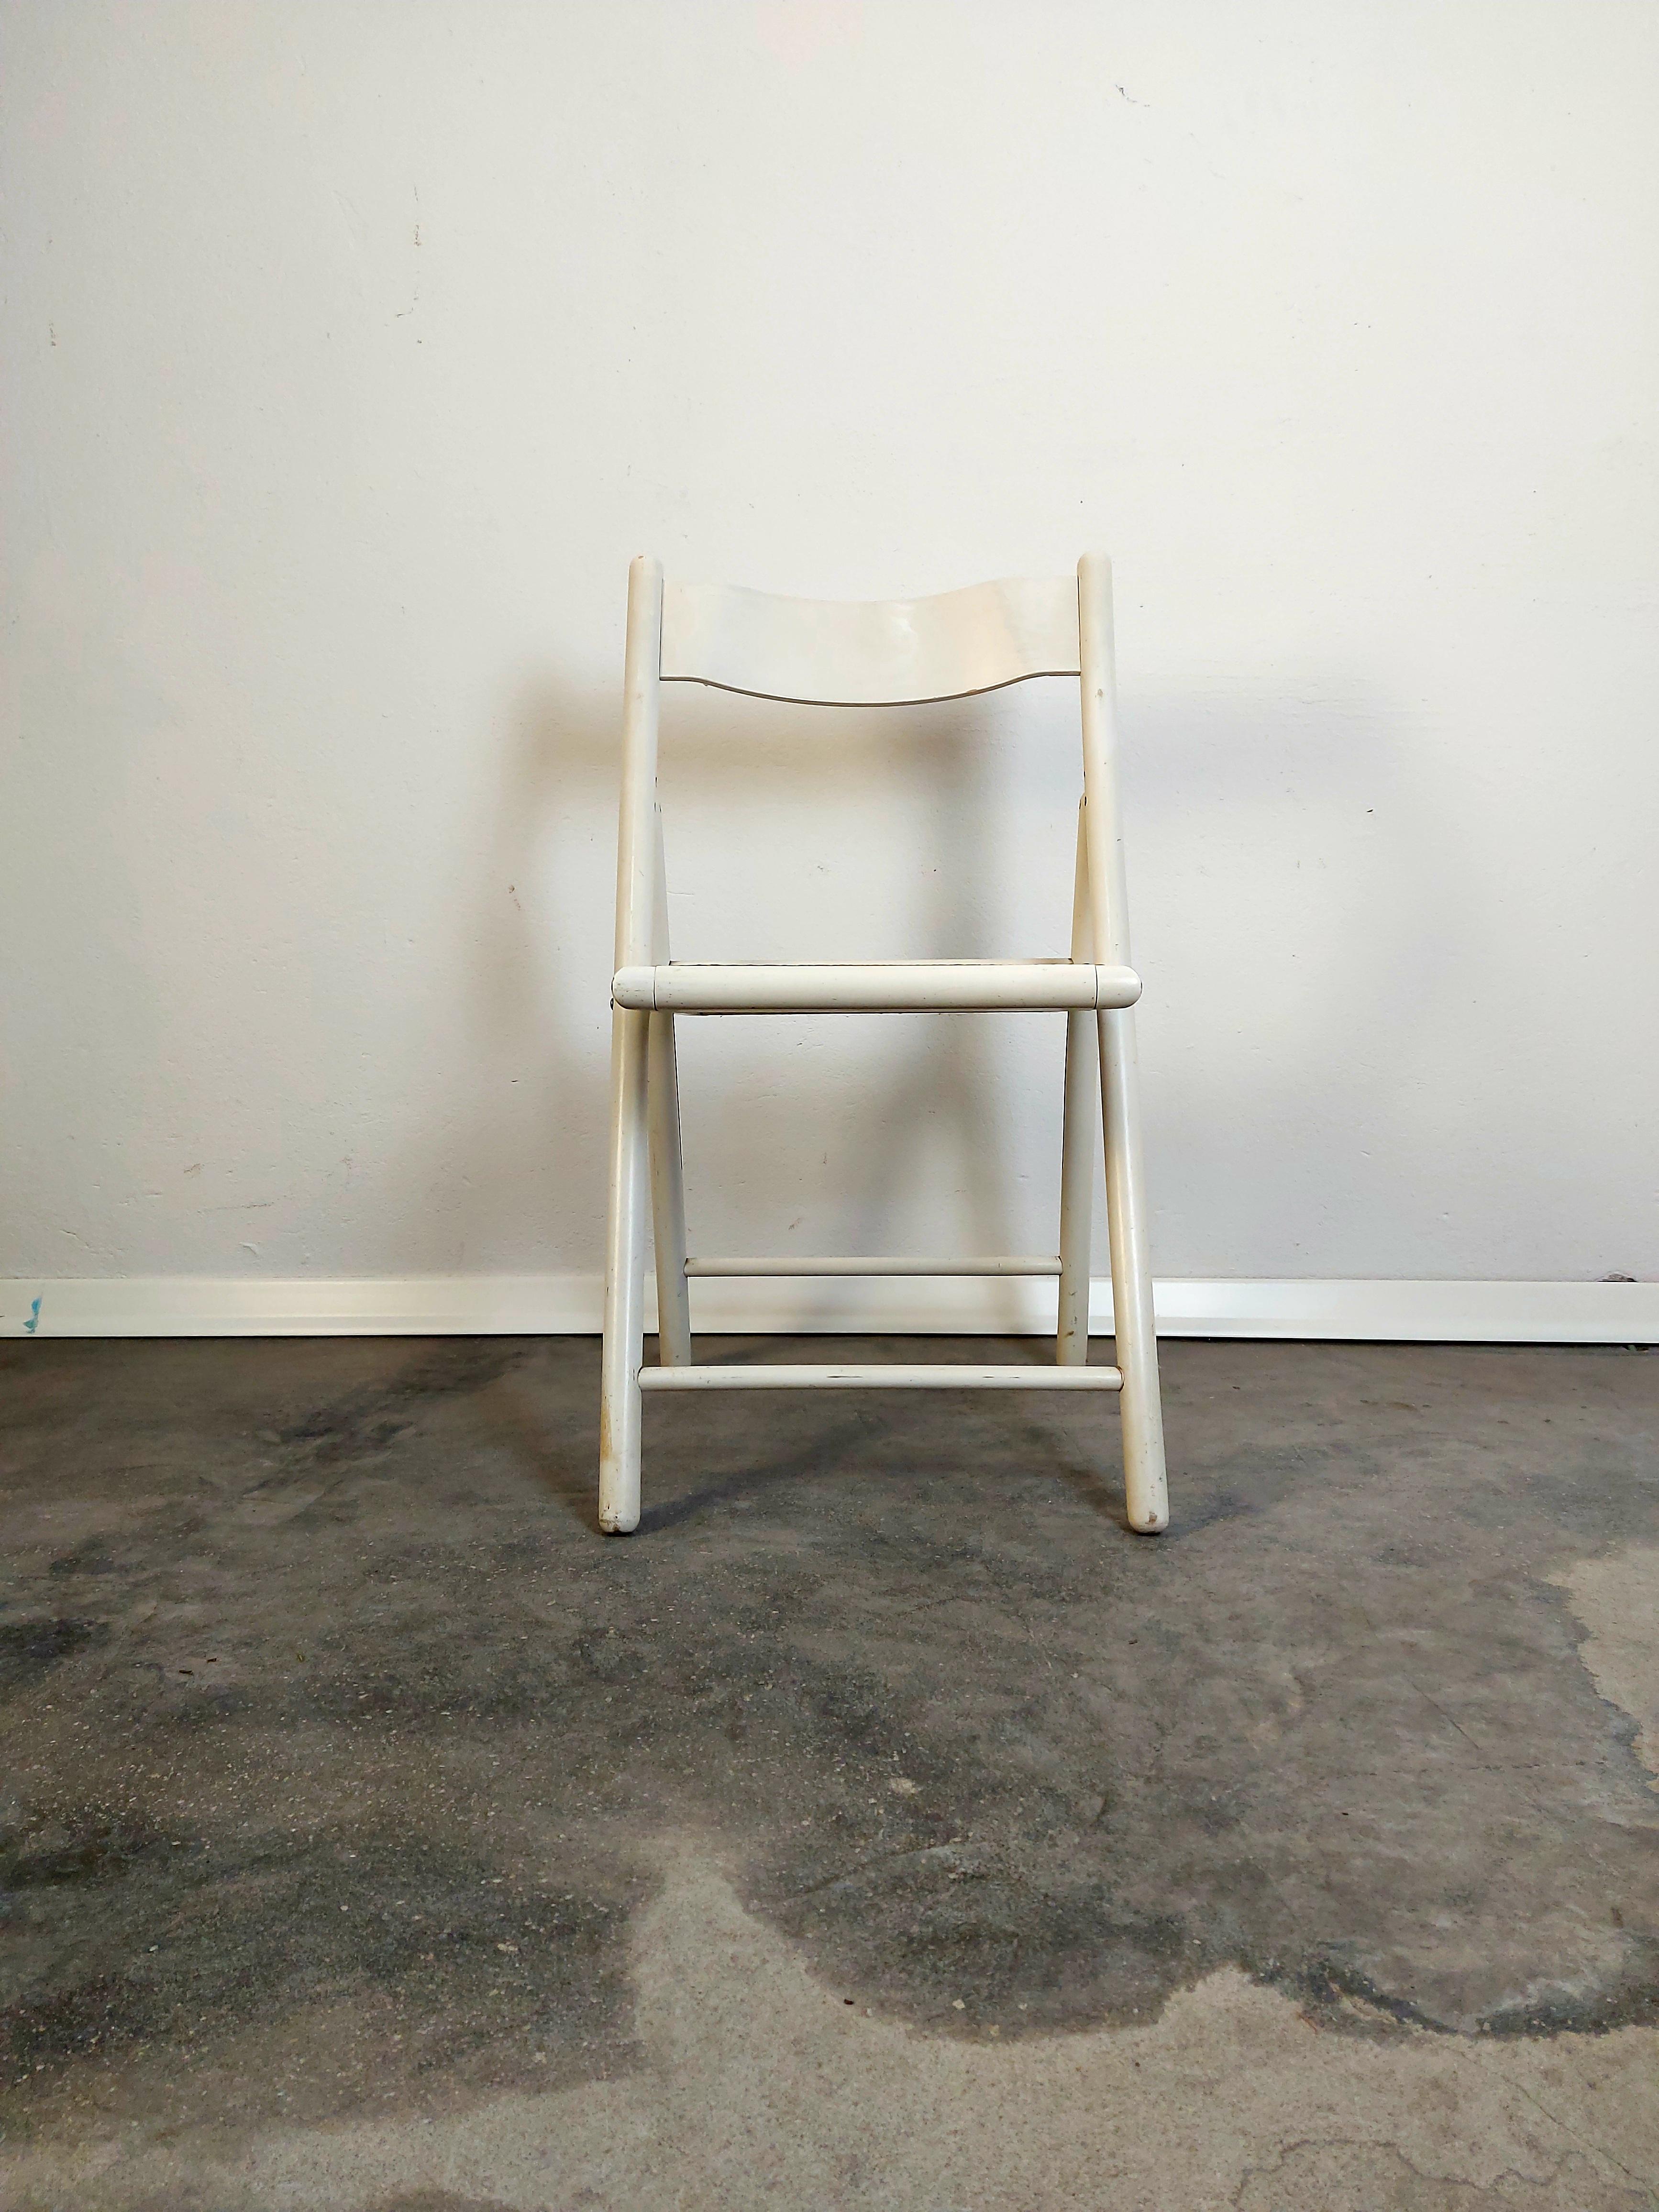 Folding chair

Period: 1970s

Manufacturer: Italy

Material: Hard wood, cane

Colour: White

Condition: good original vintage condition, signs of use

dimensions: H = 79 cm, W = 45cm, D = 38 cm, seat H = 46